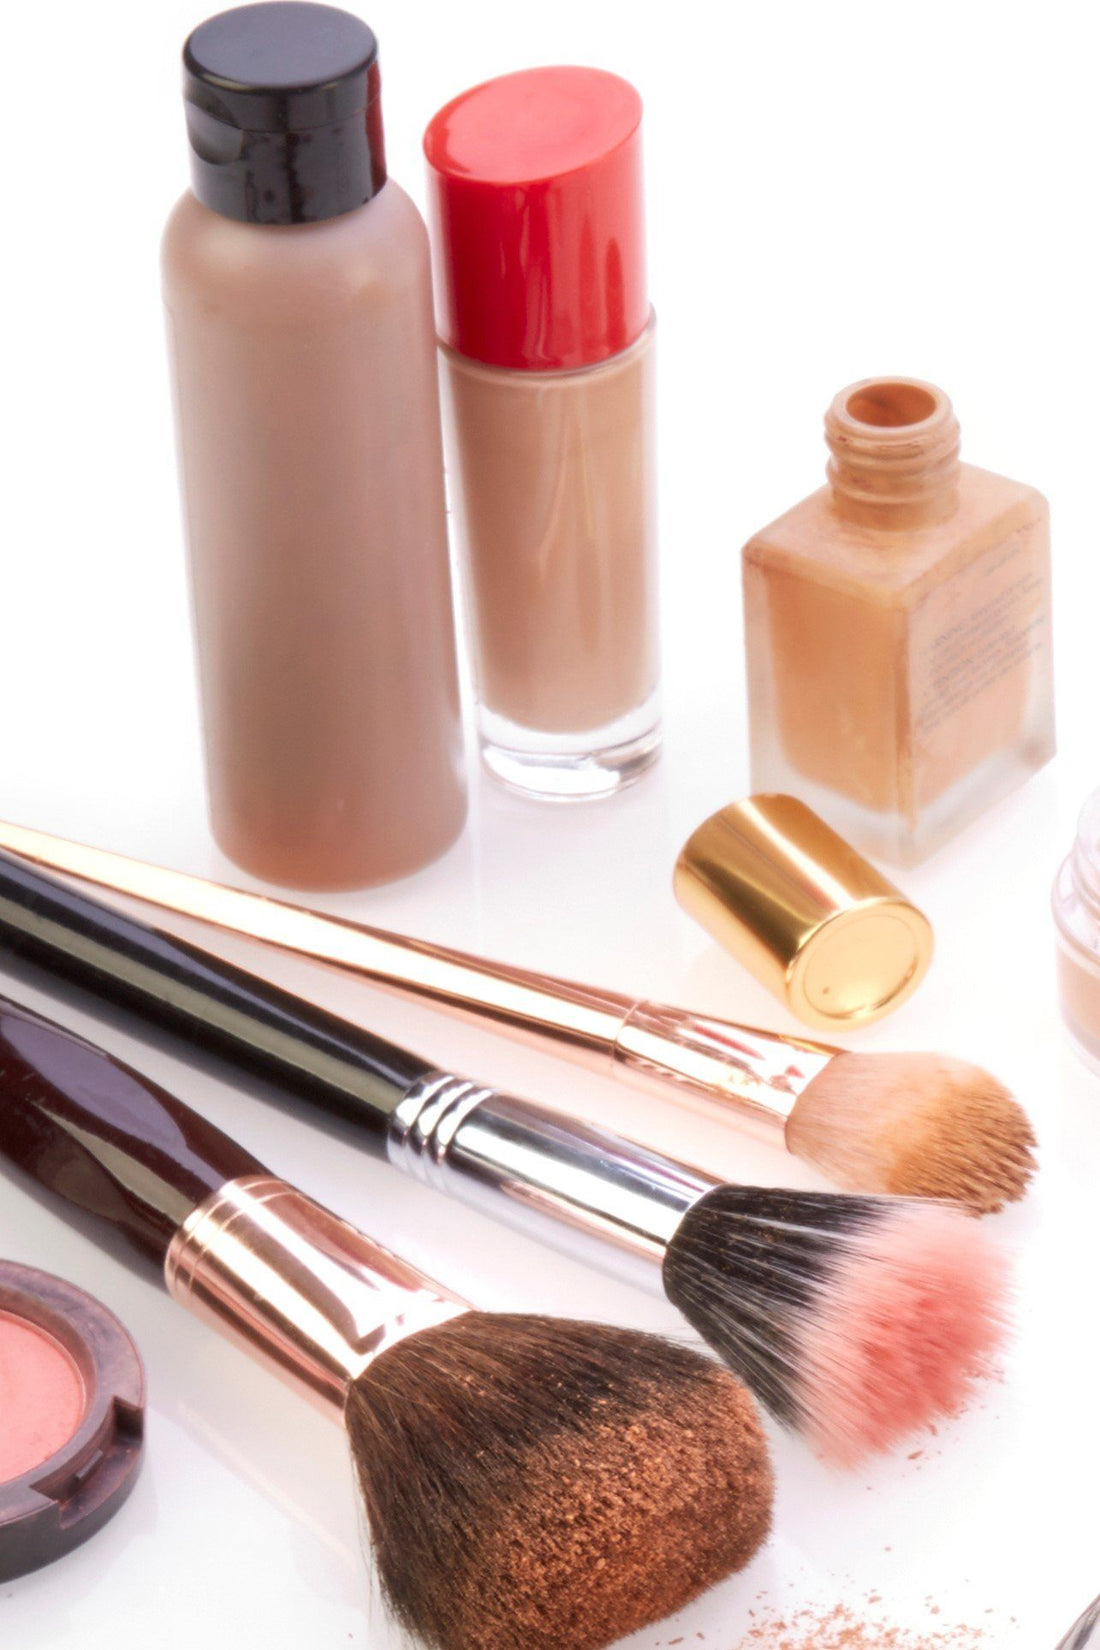 What’s lurking in your makeup bag?